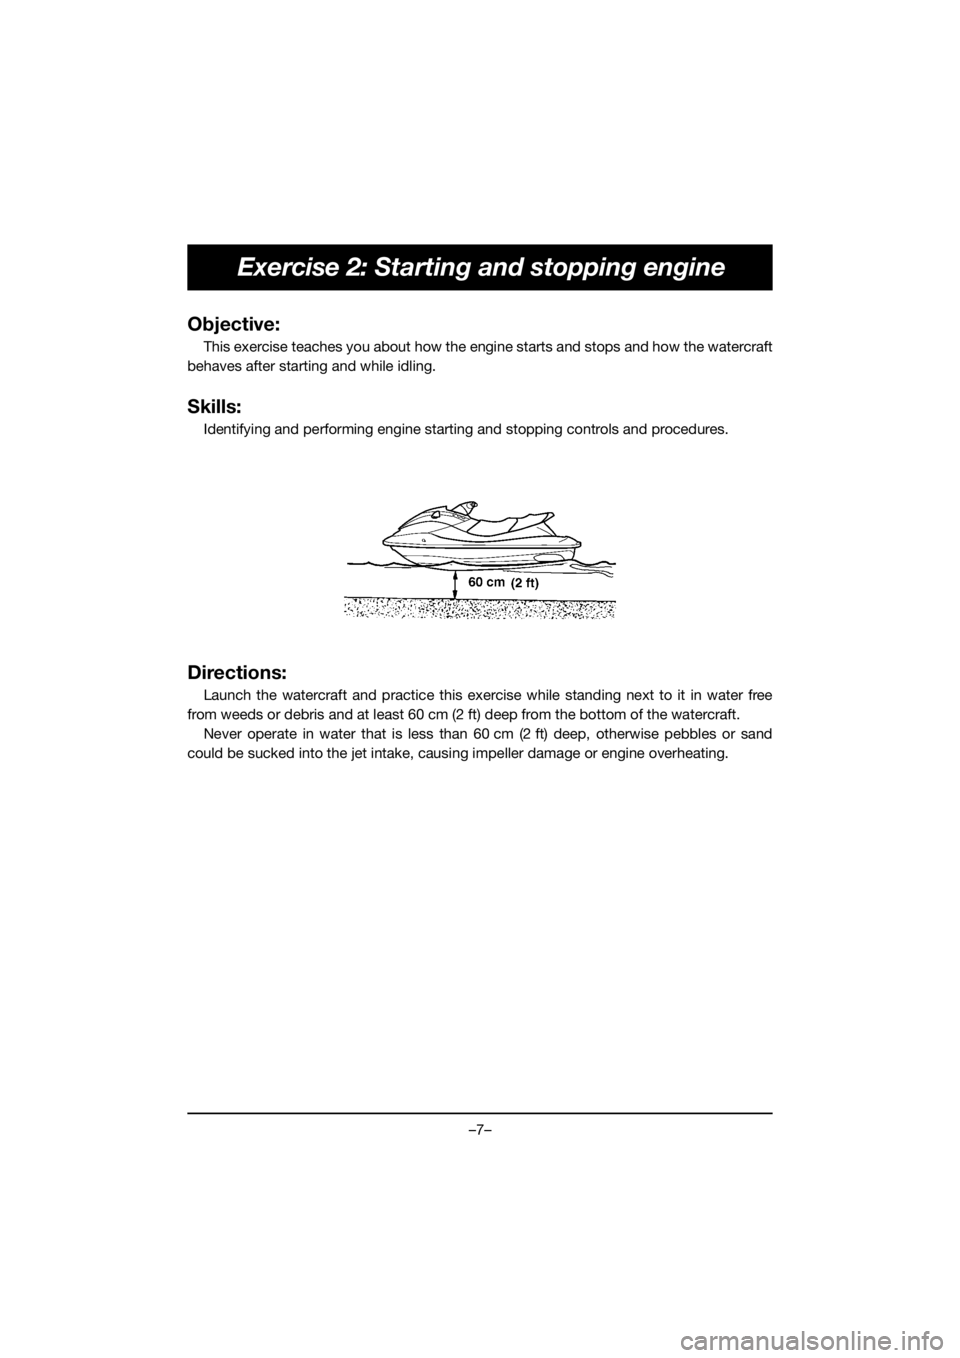 YAMAHA EX DELUXE 2019  Bruksanvisningar (in Swedish) –7–
Exercise 2: Starting and stopping engine
Objective:
This exercise teaches you about how the engine starts and stops and how the watercraft
behaves after starting and while idling.
Skills:
Iden